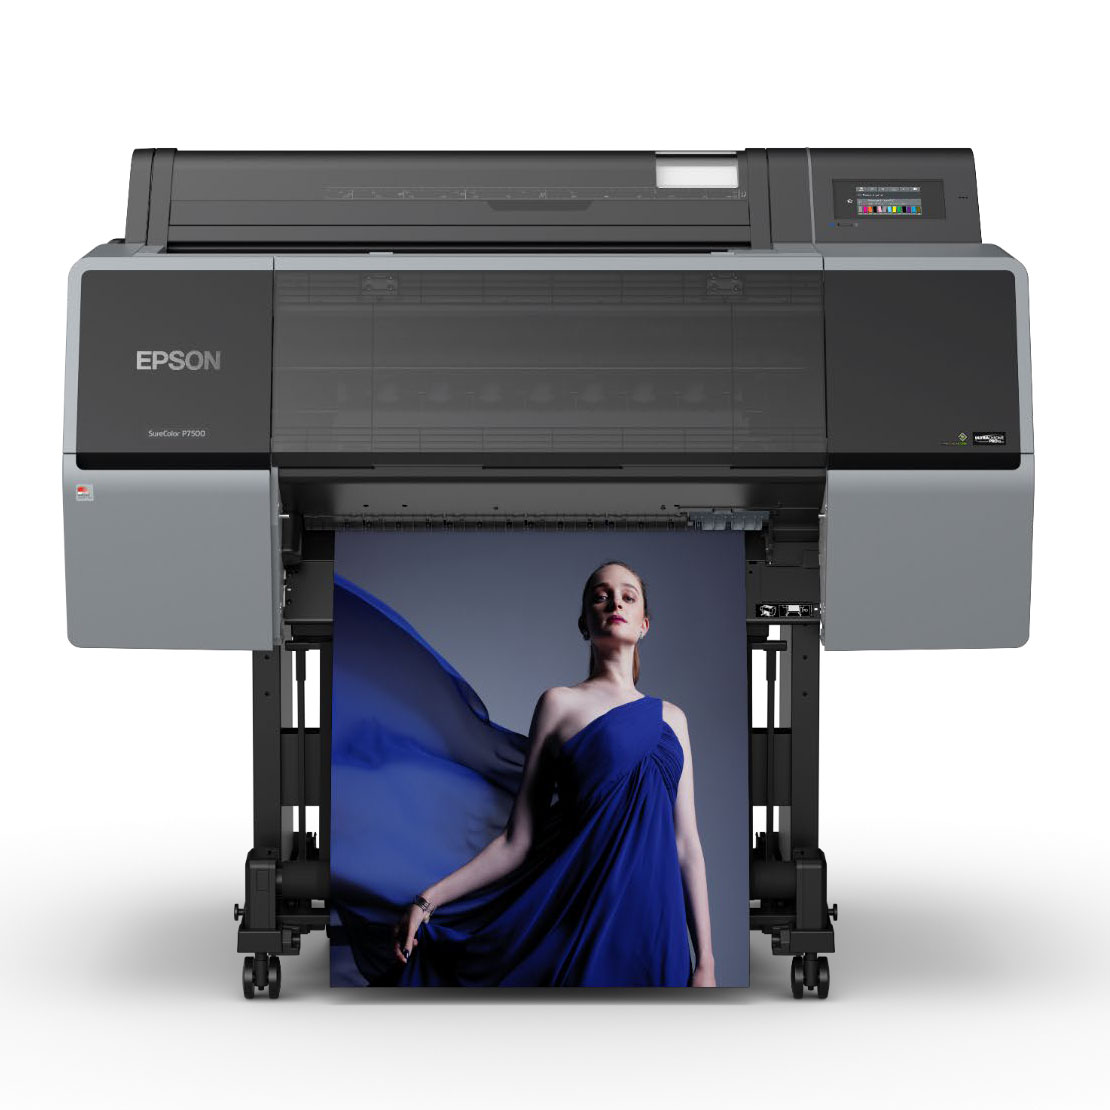 Introducing the Epson P7500